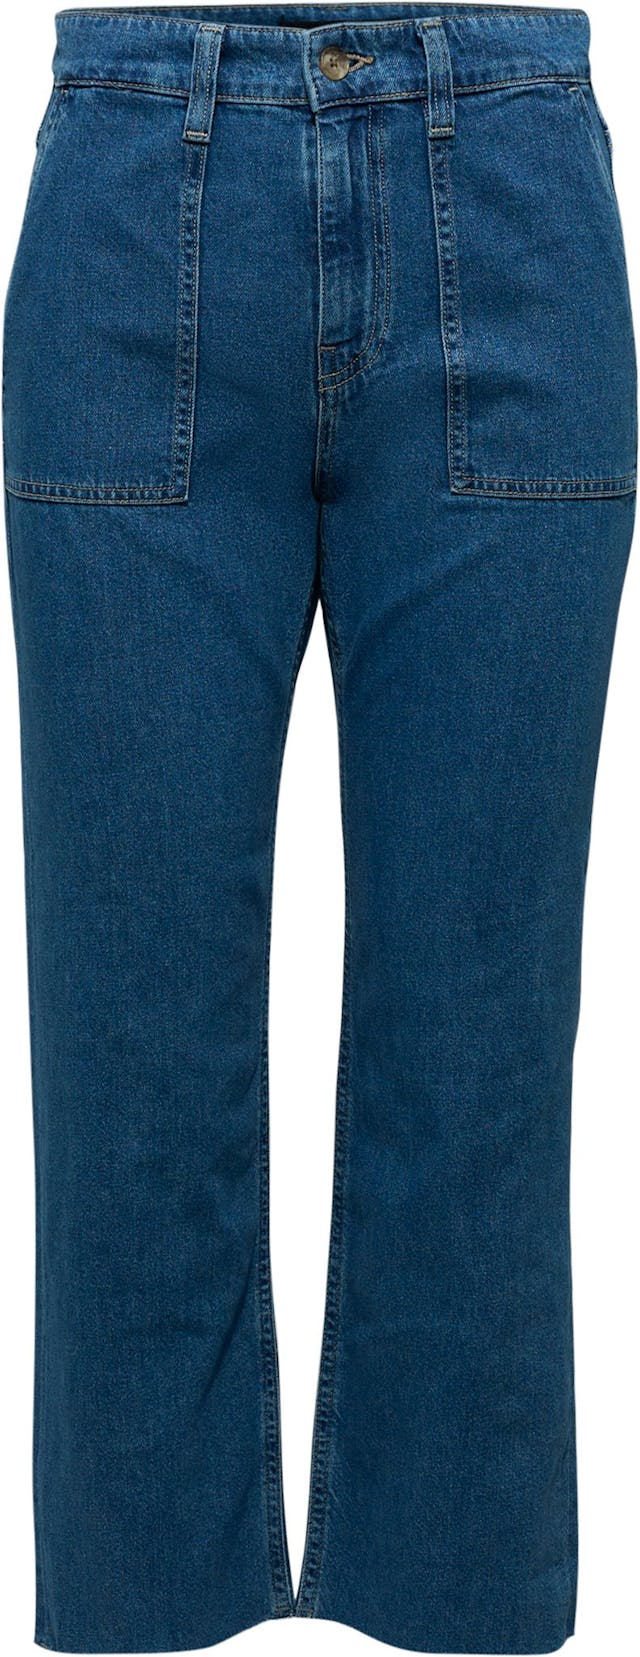 Product image for Shelia Straight Leg Jeans - Women's